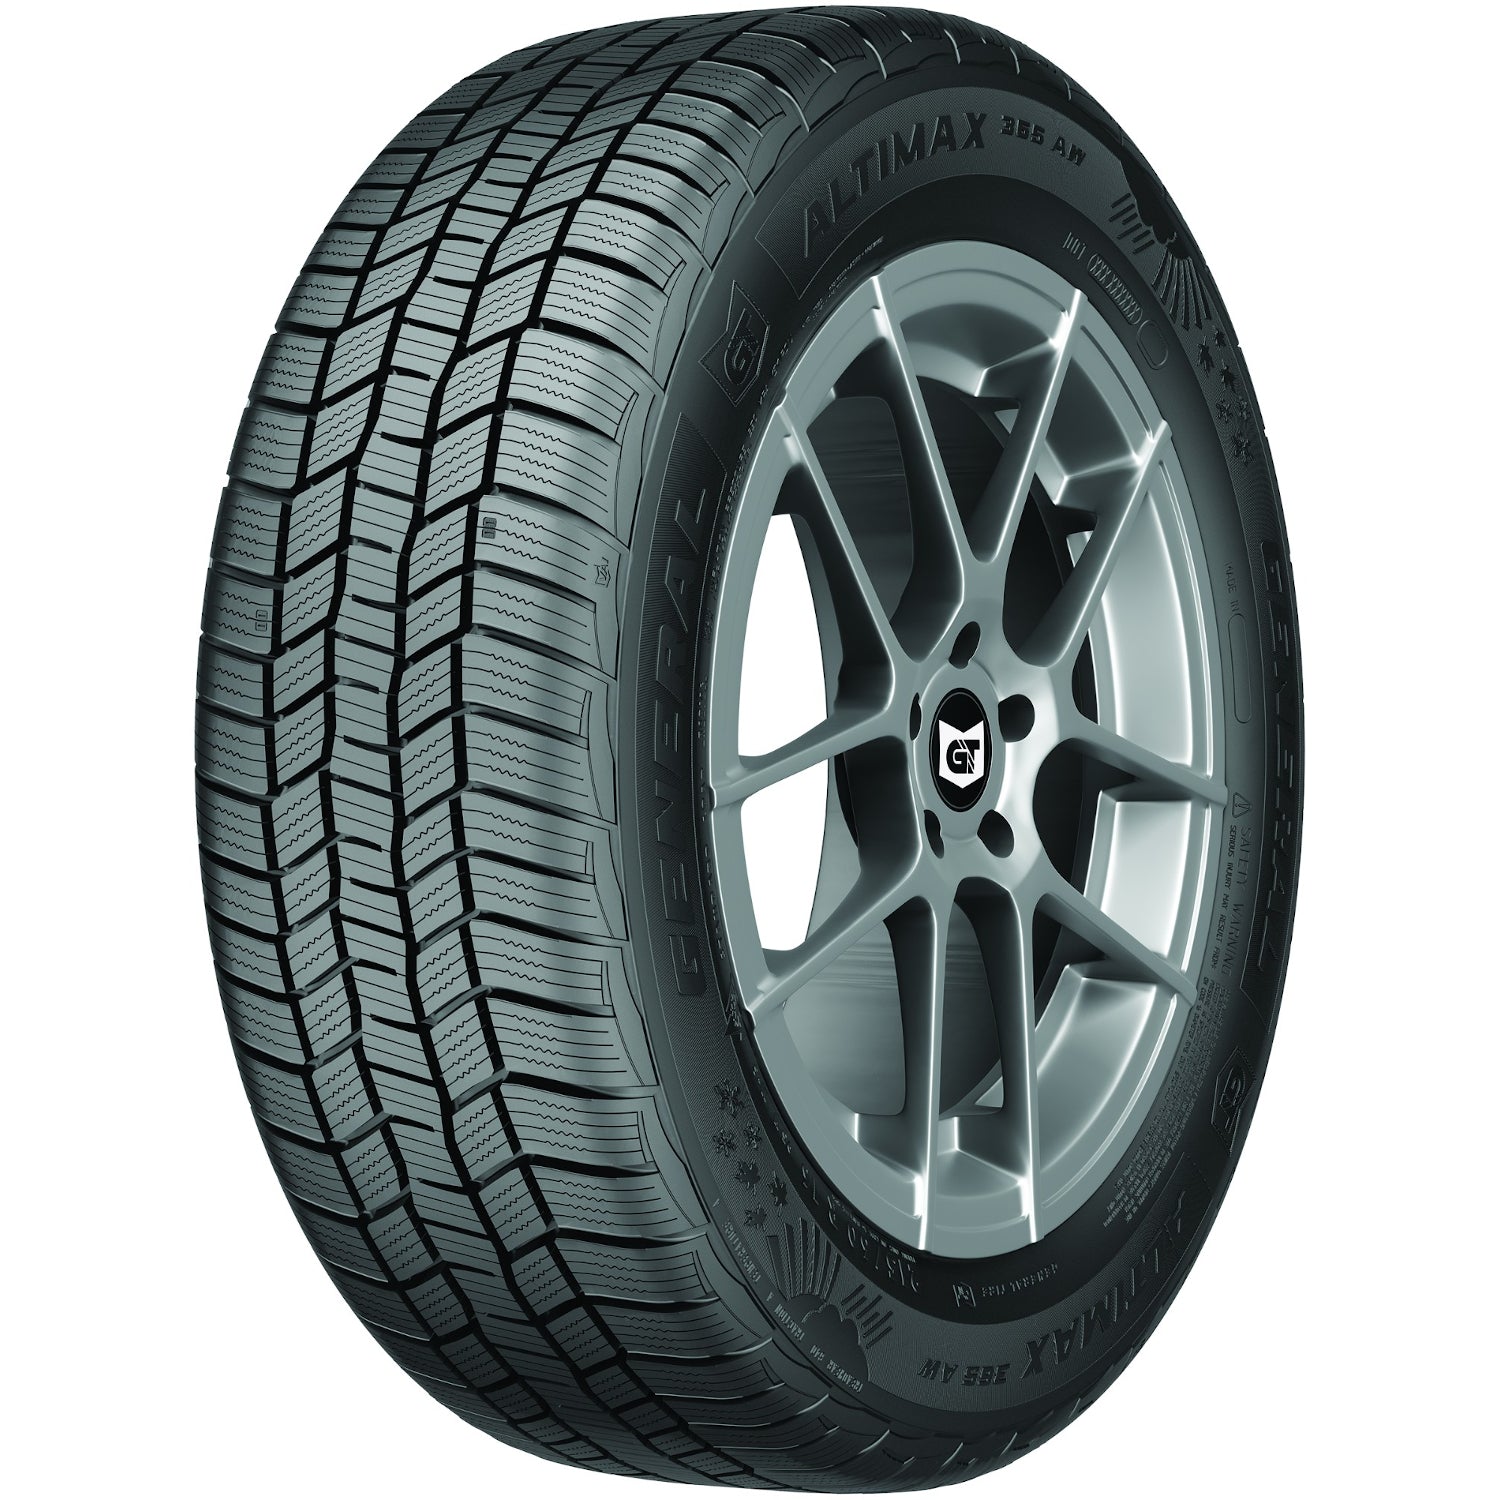 GENERAL ALTIMAX 365AW 225/60R17 (27.6X8.9R 17) Tires